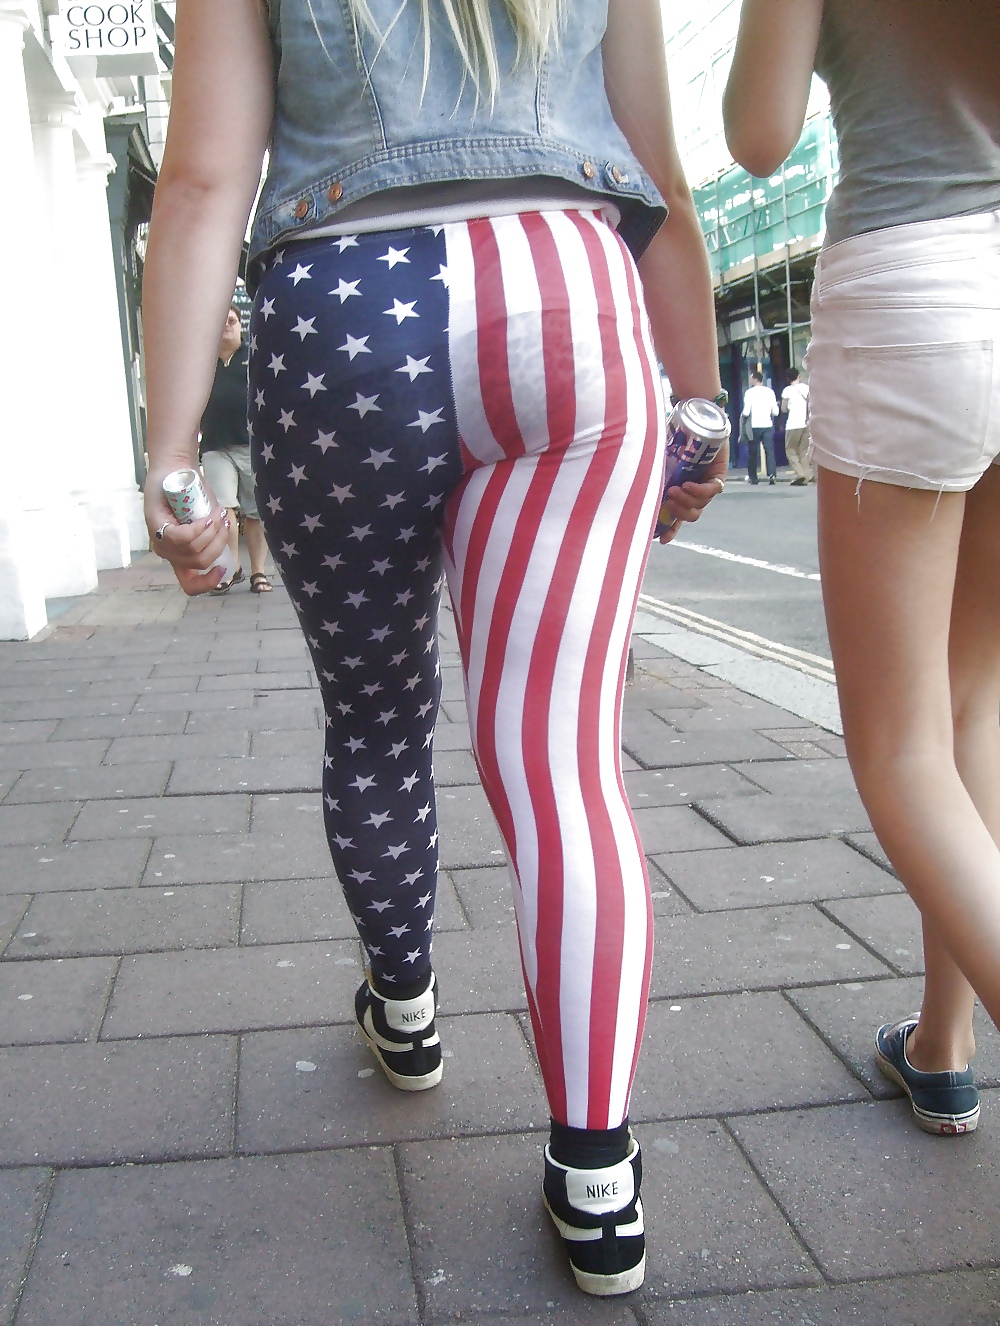 The best Leggings I have found in Hamsters Stars and Stripes